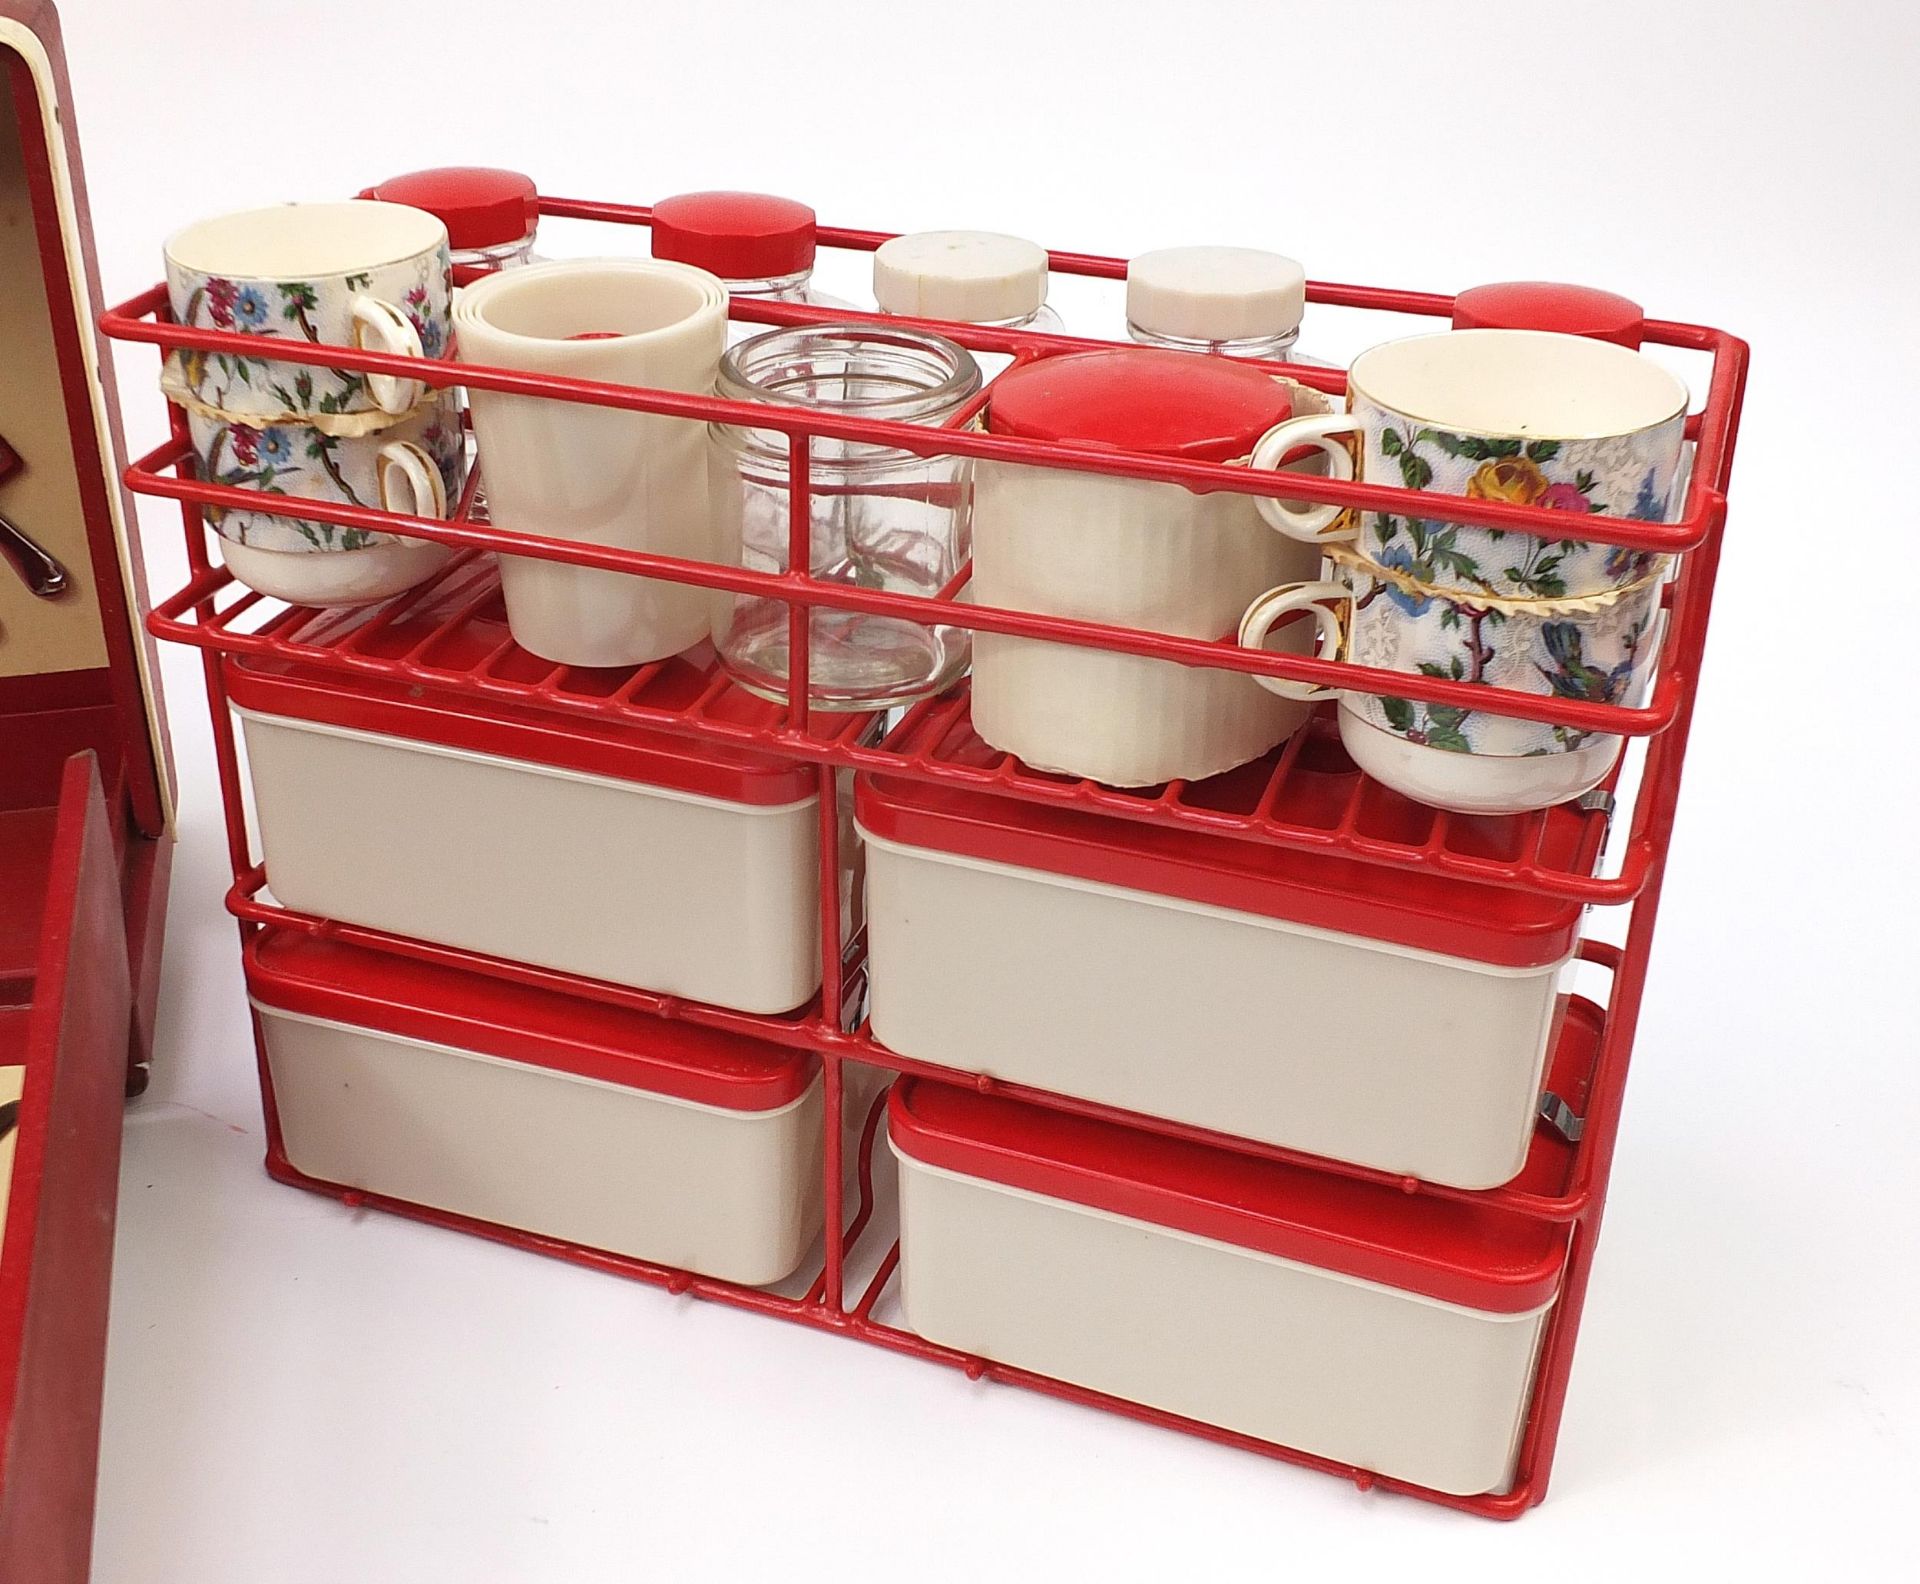 Large red Brexton picnic hamper retailed by Harrods of London, the hamper comprising Thermos flasks, - Image 4 of 8